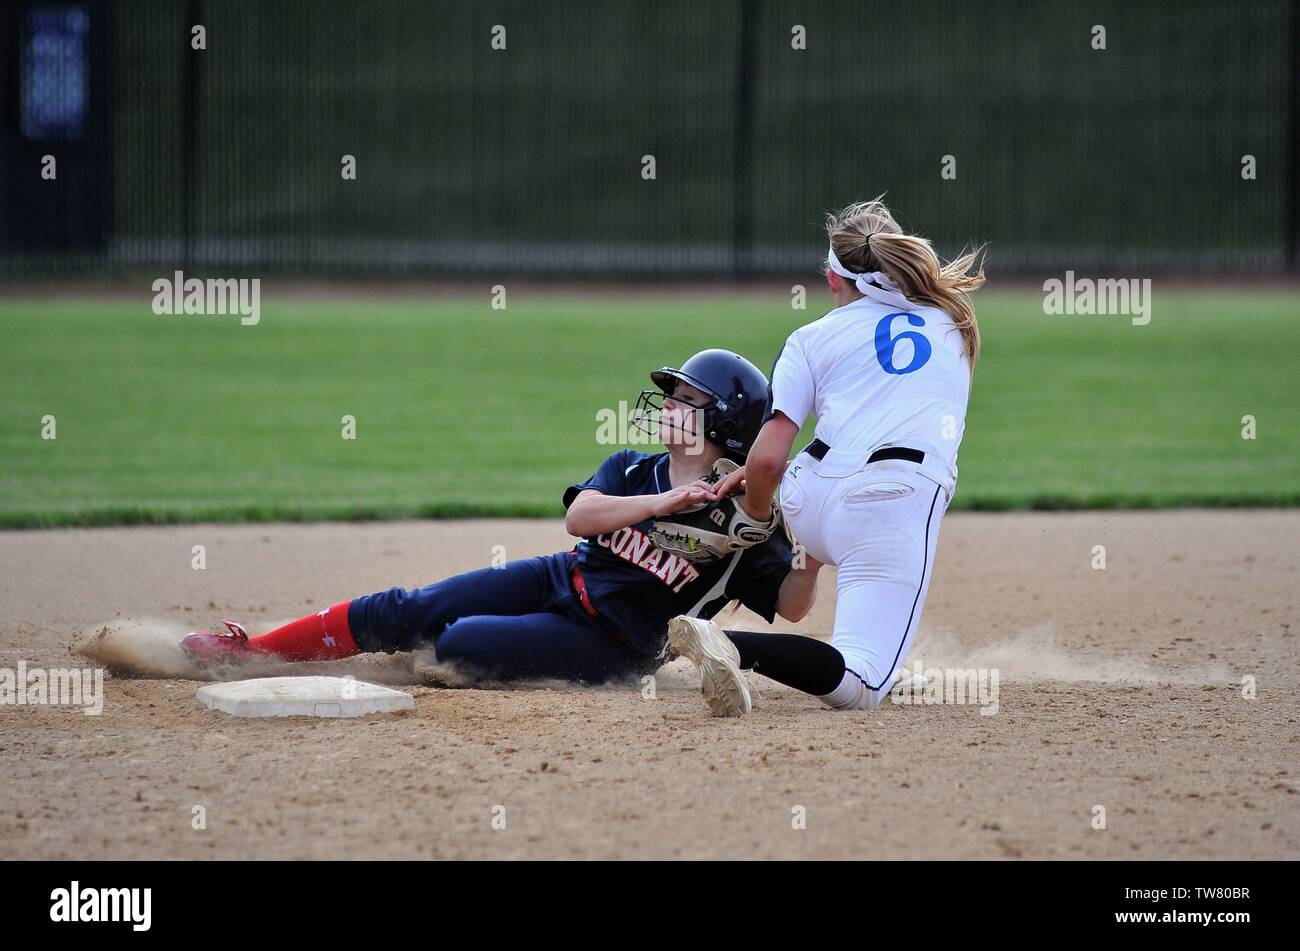 Middle infielder applying a tag on a sliding runner who was retired while attempting to steal second base. USA. Stock Photo